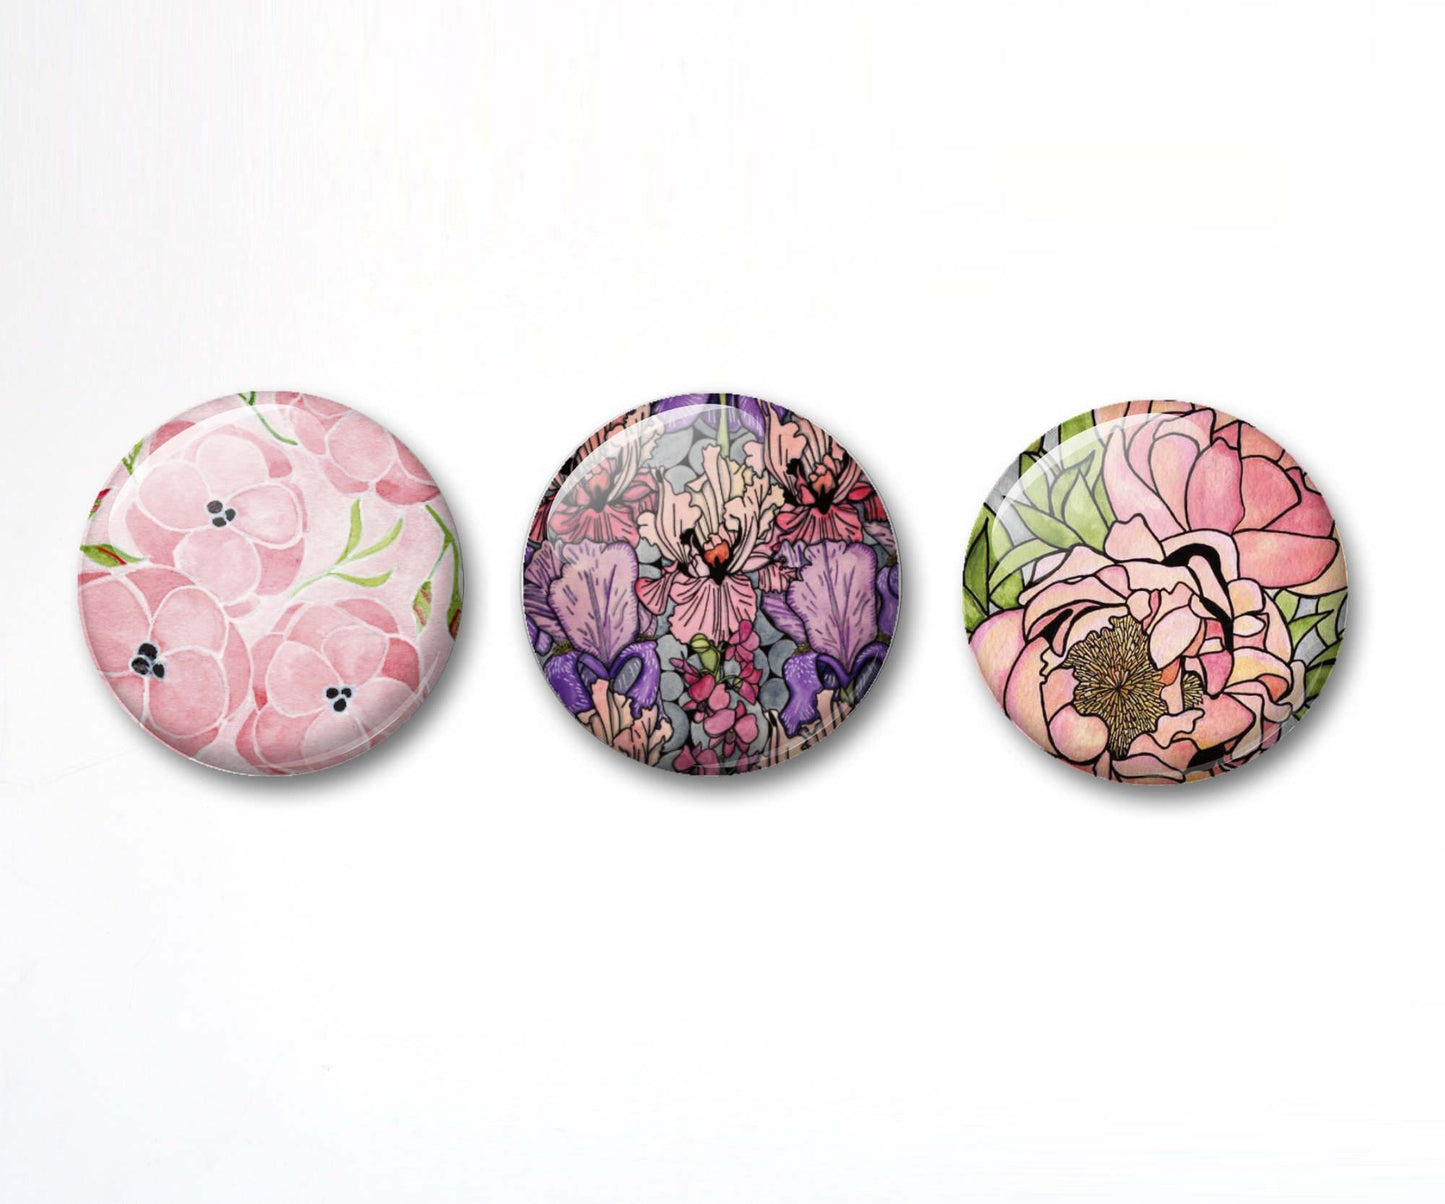 PinkPolish Design Buttons "Pretty in Pink" Button Pack - 3-Pack Pin Back Button, 1 Inch